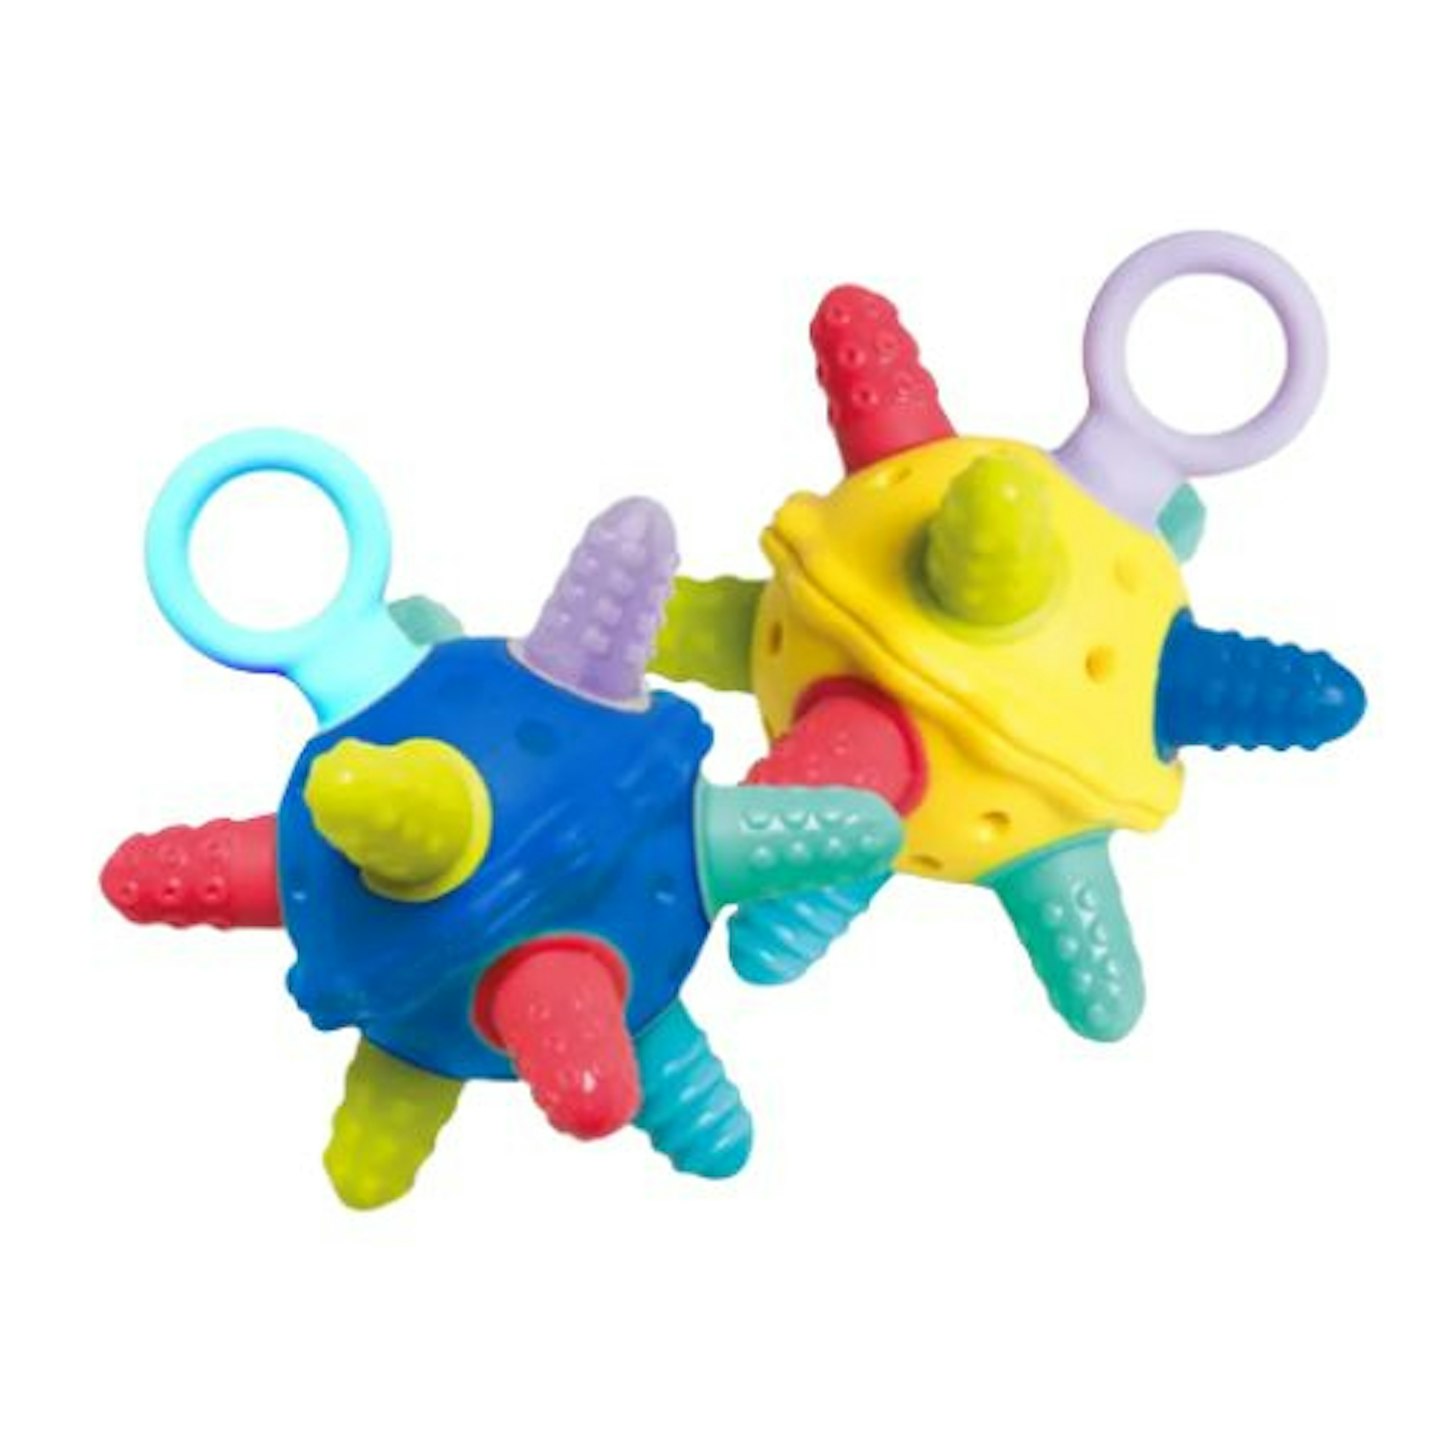 2-Pack Silicone Sensory Travel Teether Balls